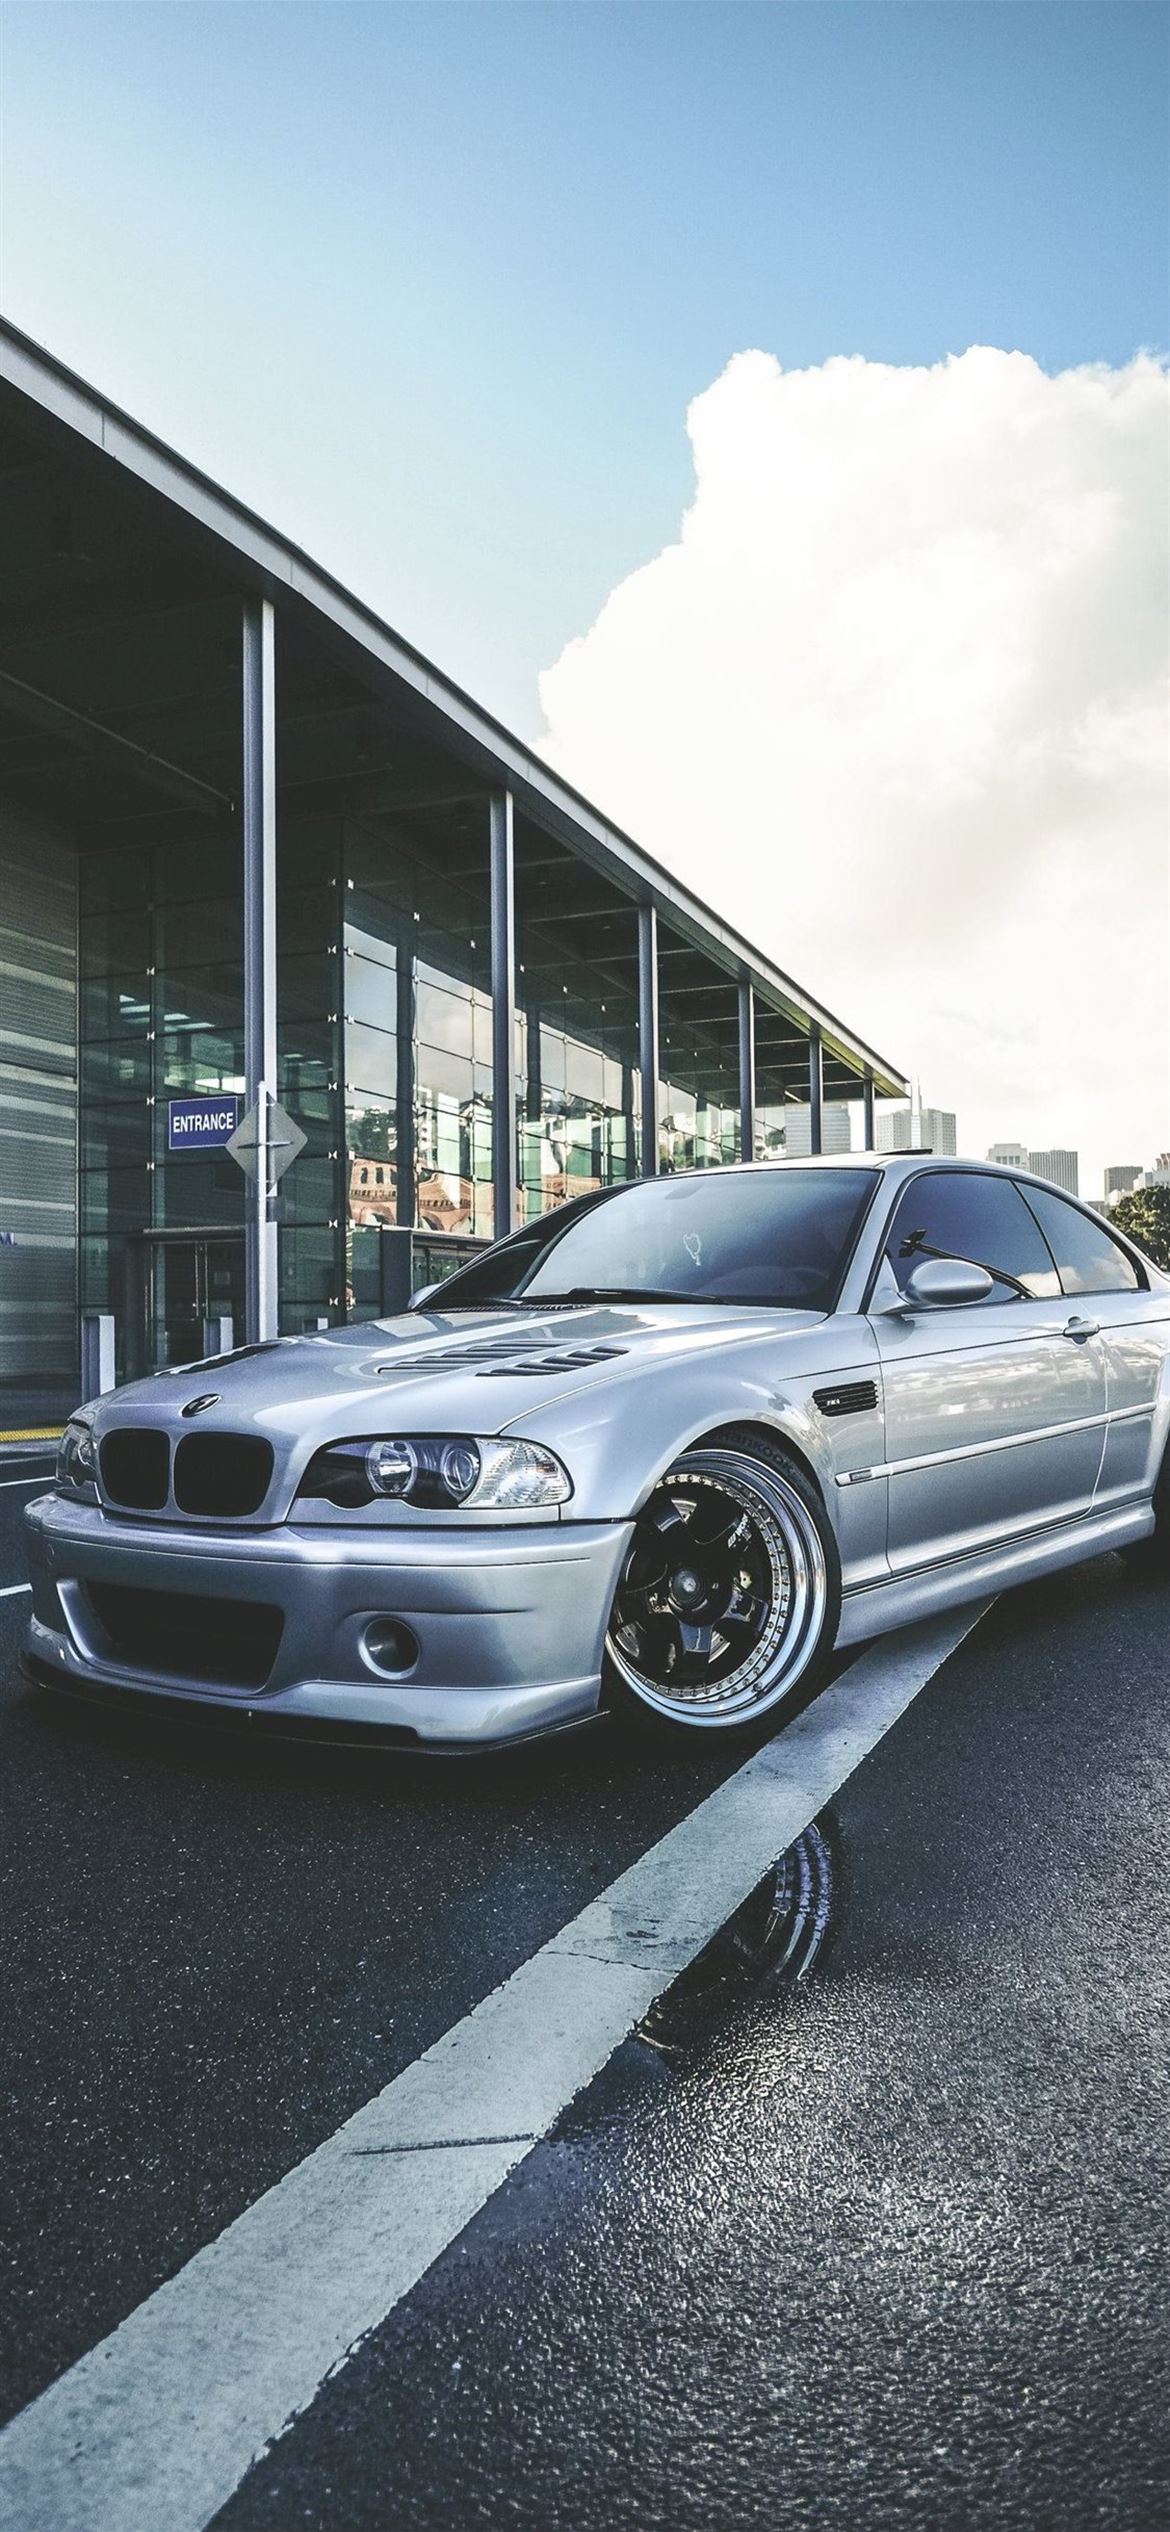 bmw e46 m3 gtr iPhone Wallpapers Free Download